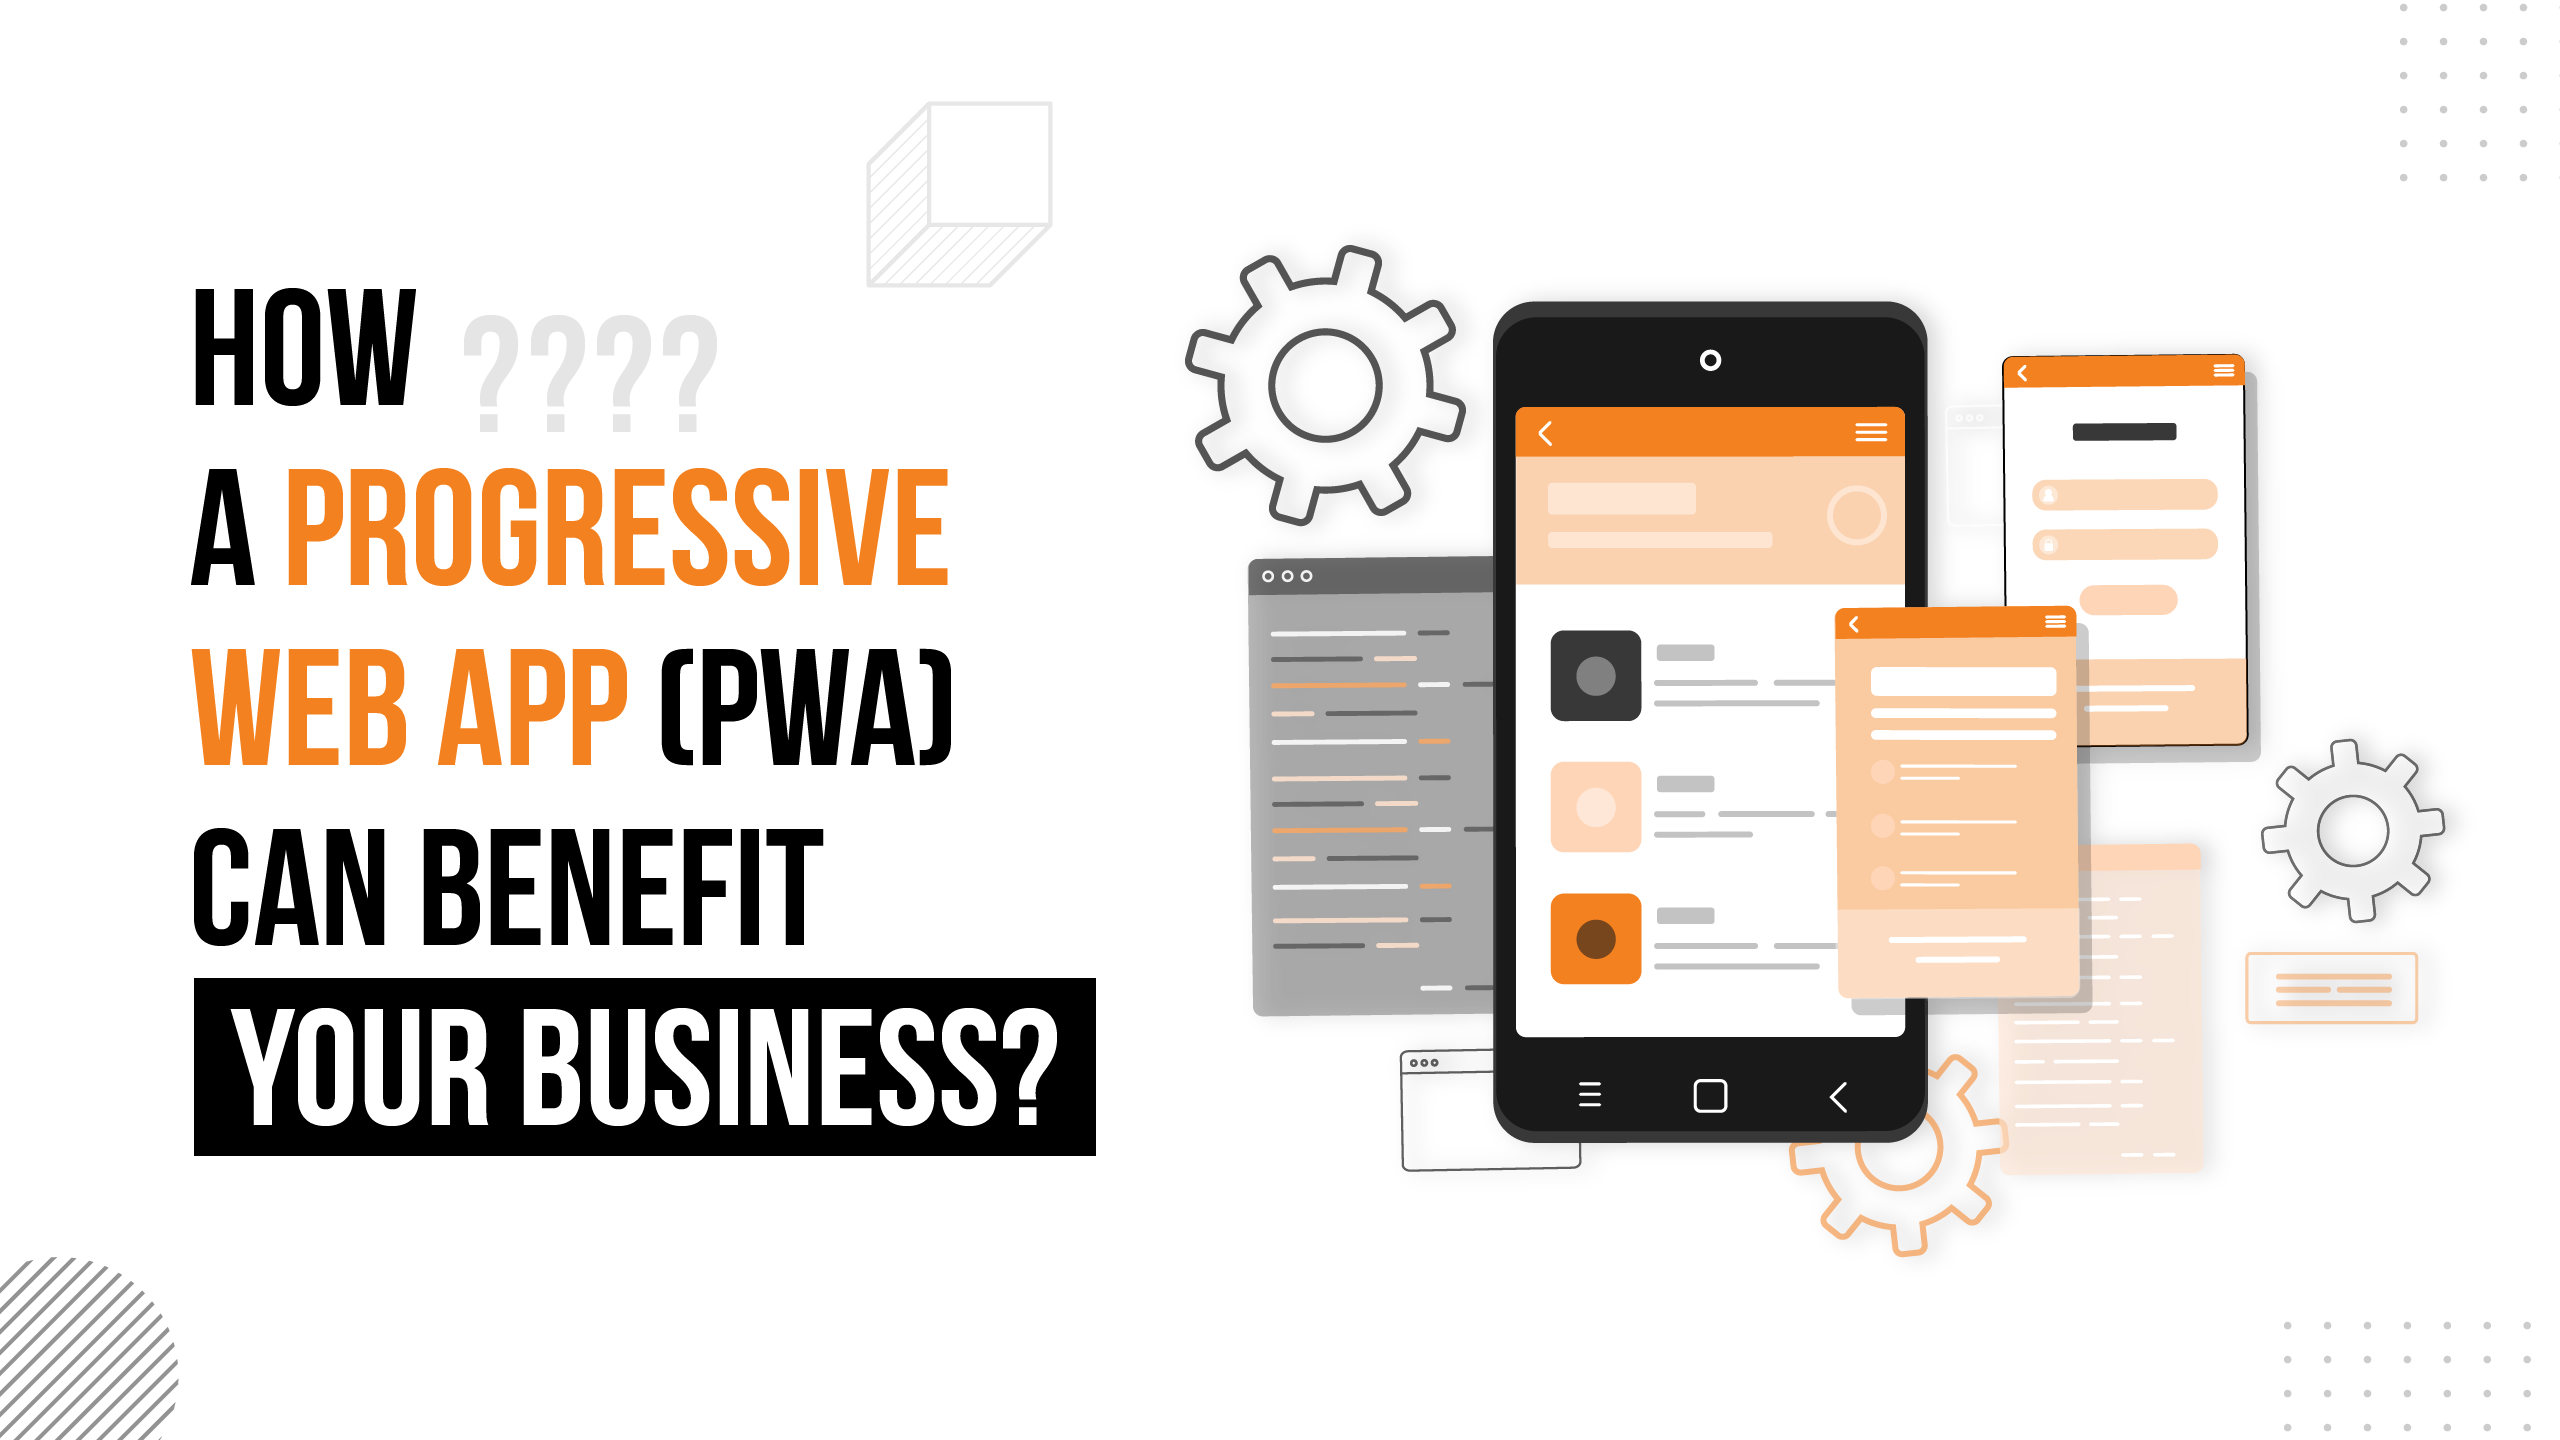 How a Progressive Web App (PWA) Can Benefit Your Business?